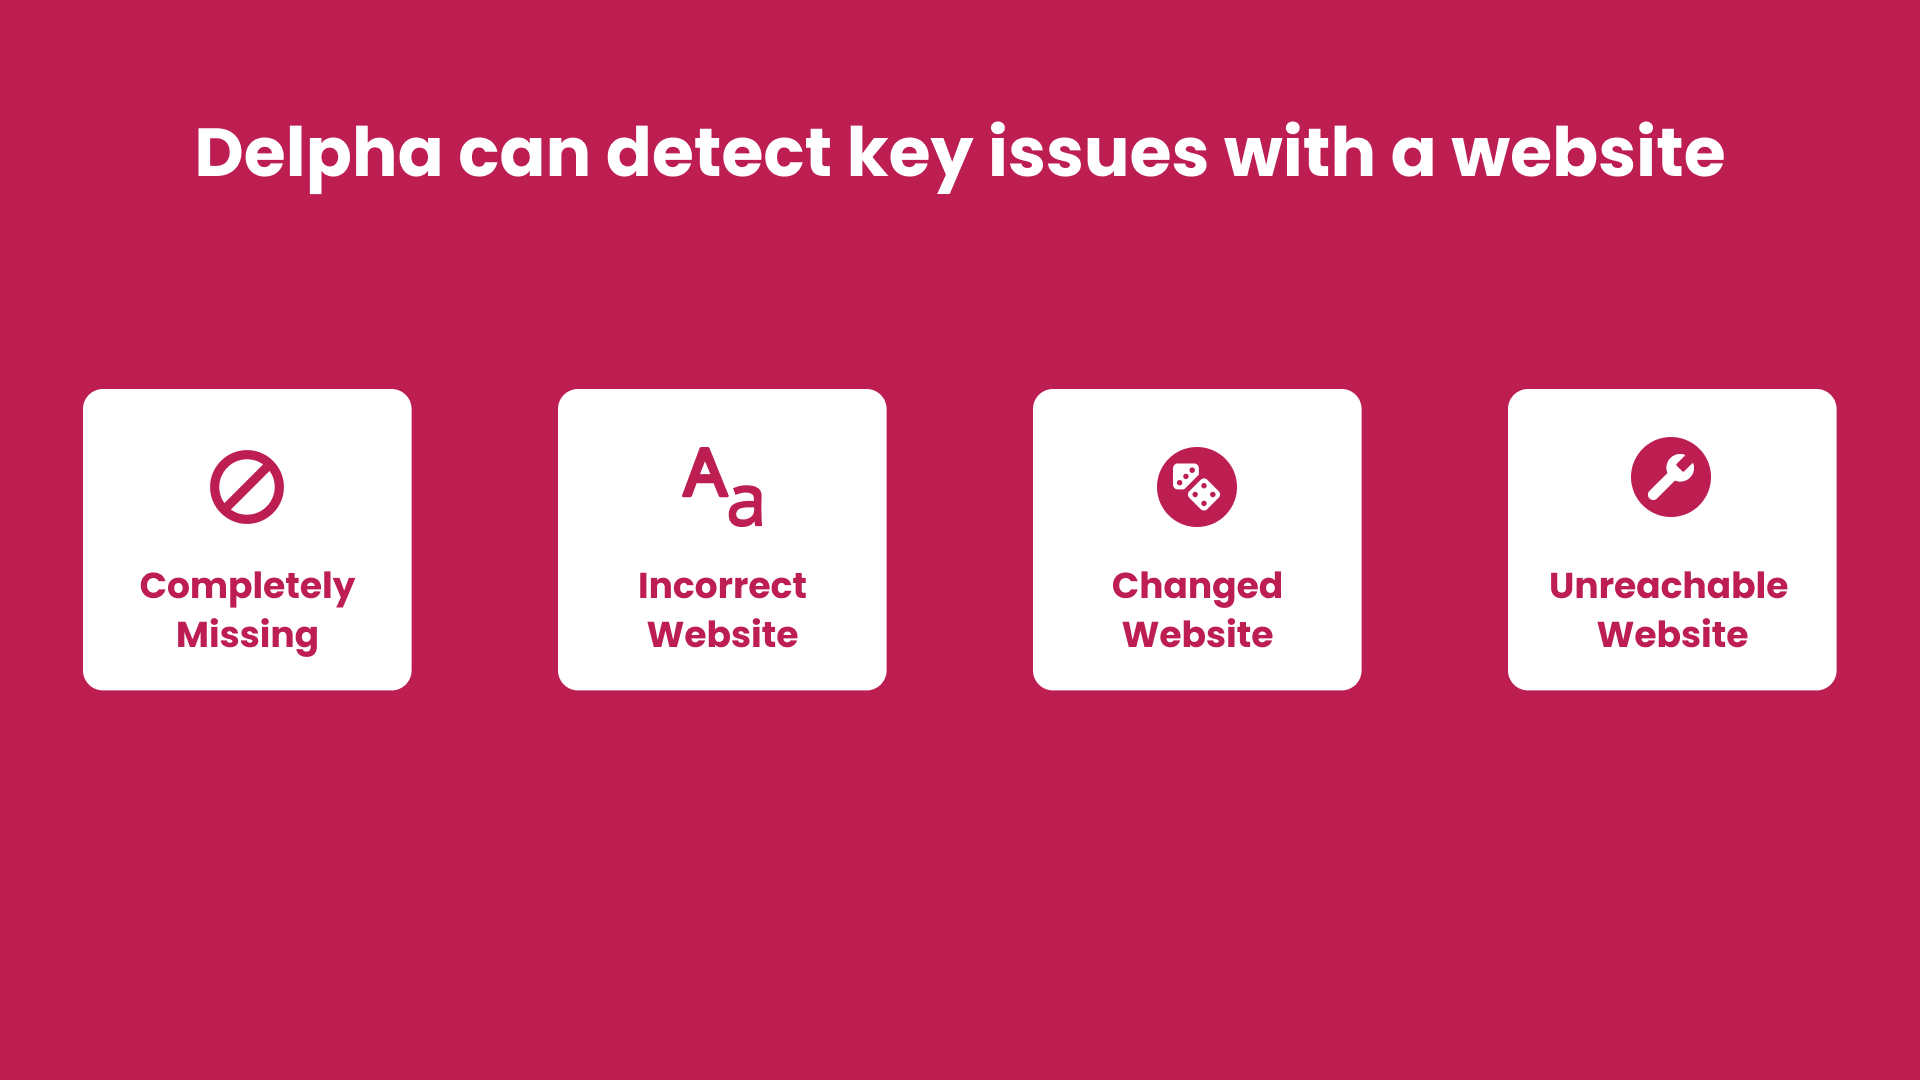 With Identify Missing Websites, Delpha can detect when an Account’s website is missing, incorrect, changed or unreachable.